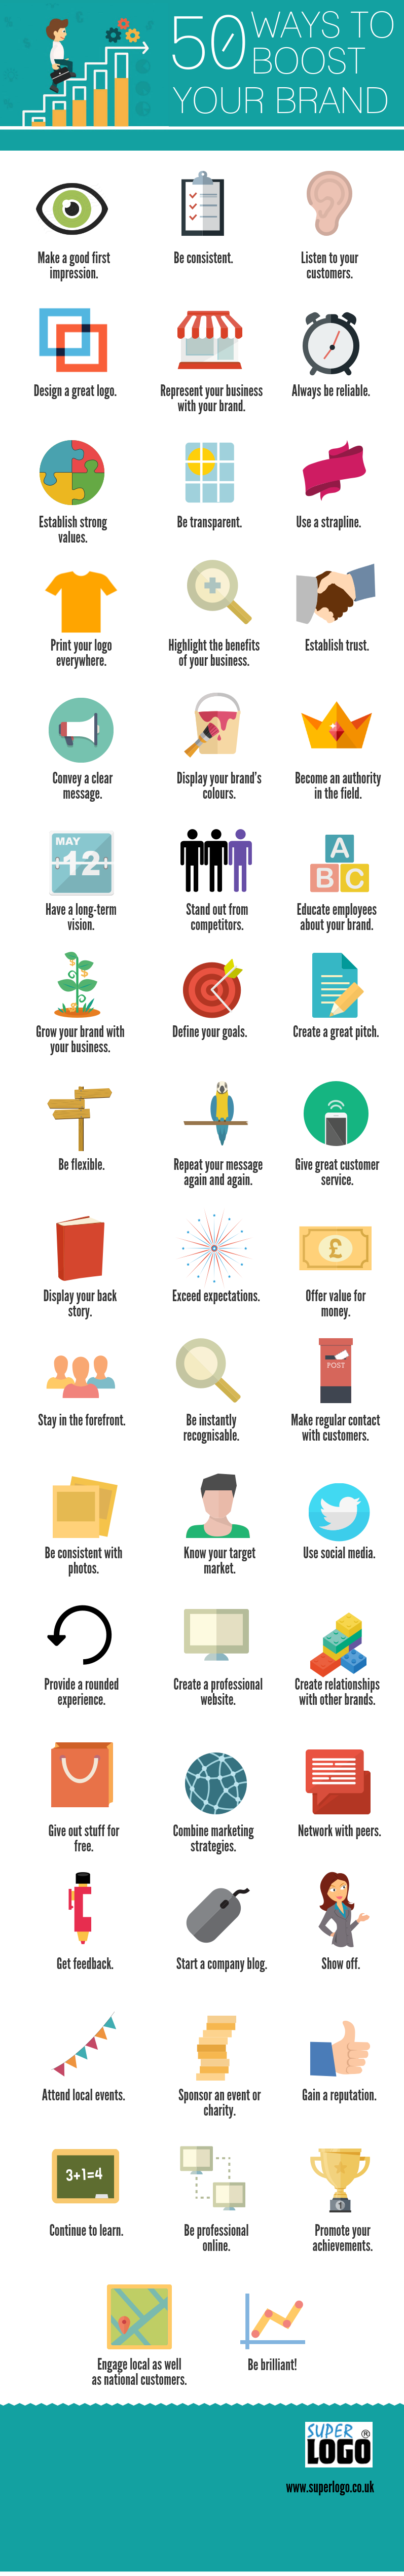 50 Ways to Build Your Brand